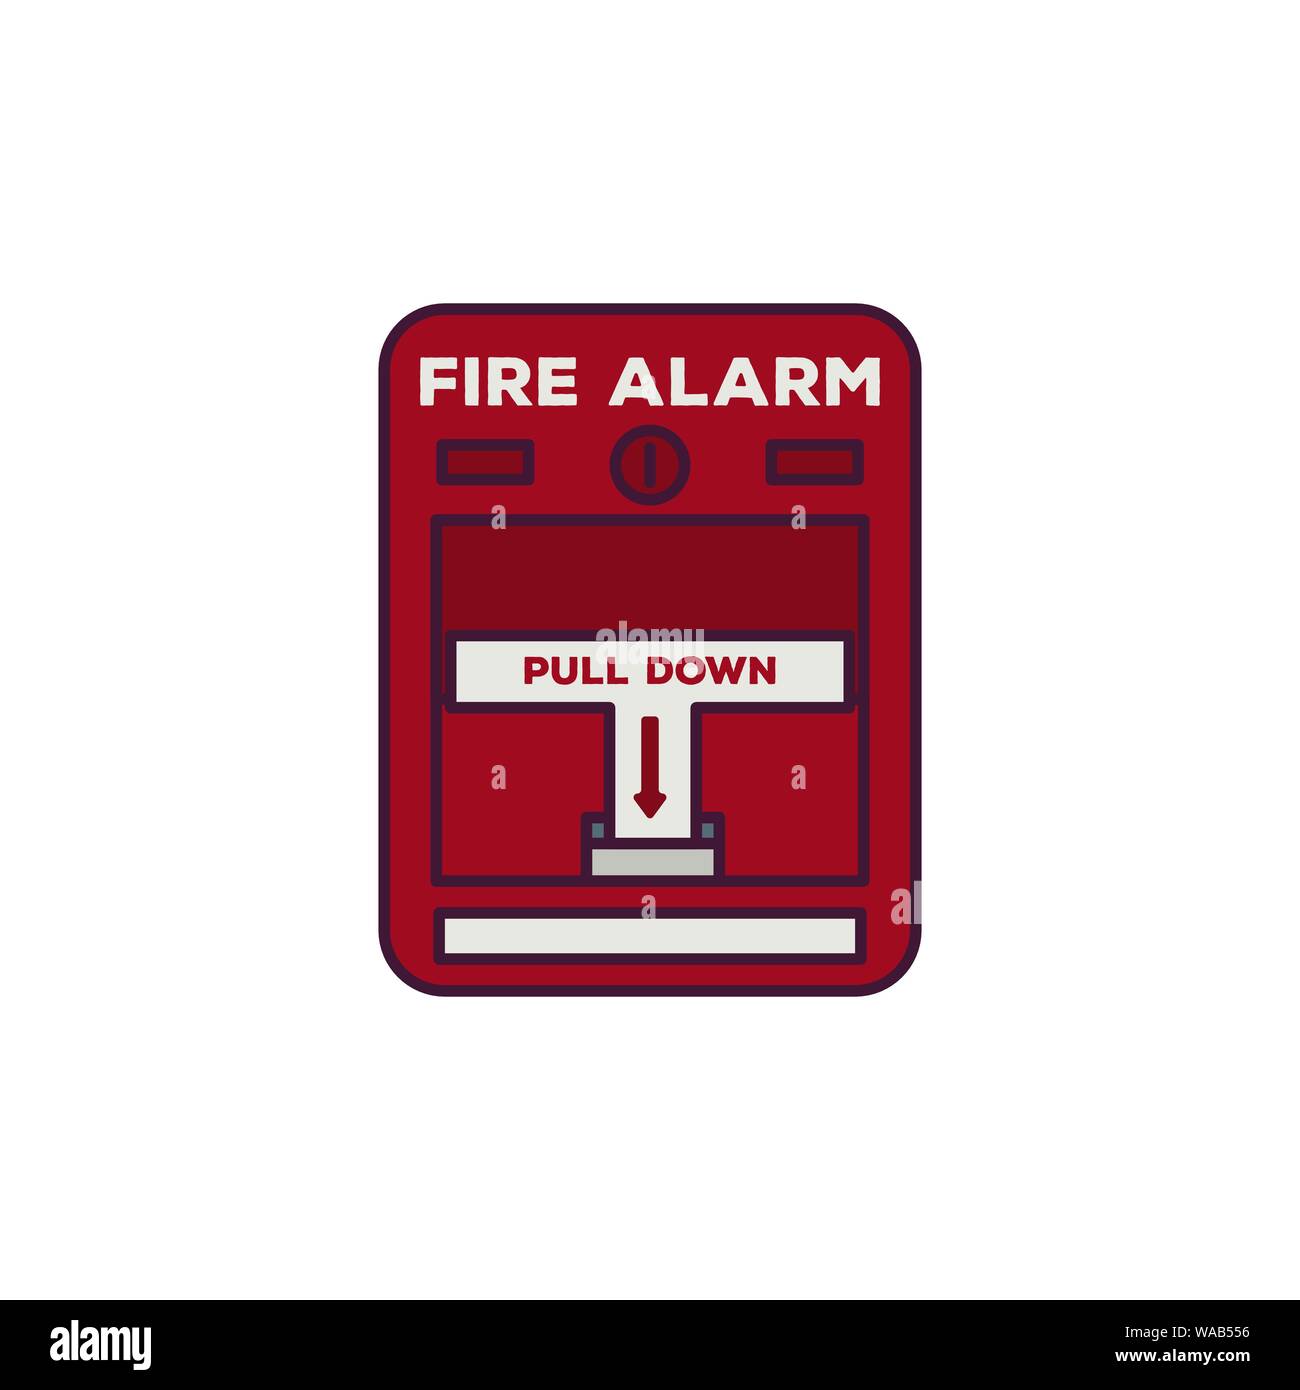 Fire alarm box. Fire alarm text, pull down switch. Line style vector illustration. Classic fire switch. Rescue and alarm pixel perfect banner. Stock Vector